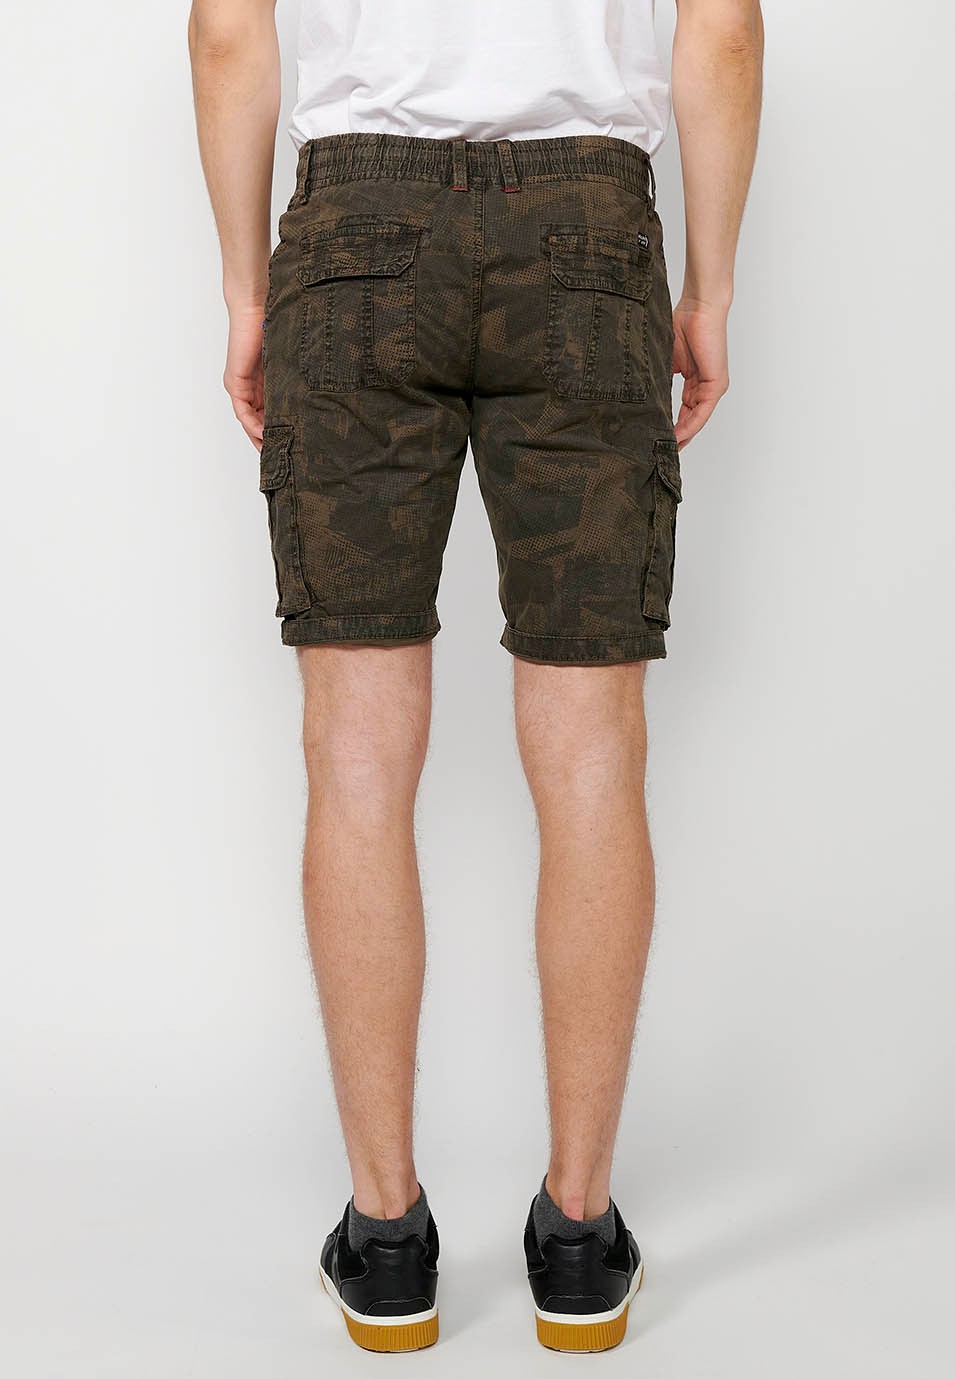 Cargo shorts with front closure with zipper and button and four pockets, two rear pockets with flap with two cargo pockets with flap and adjustable waist with drawstring in Khaki color for men 3